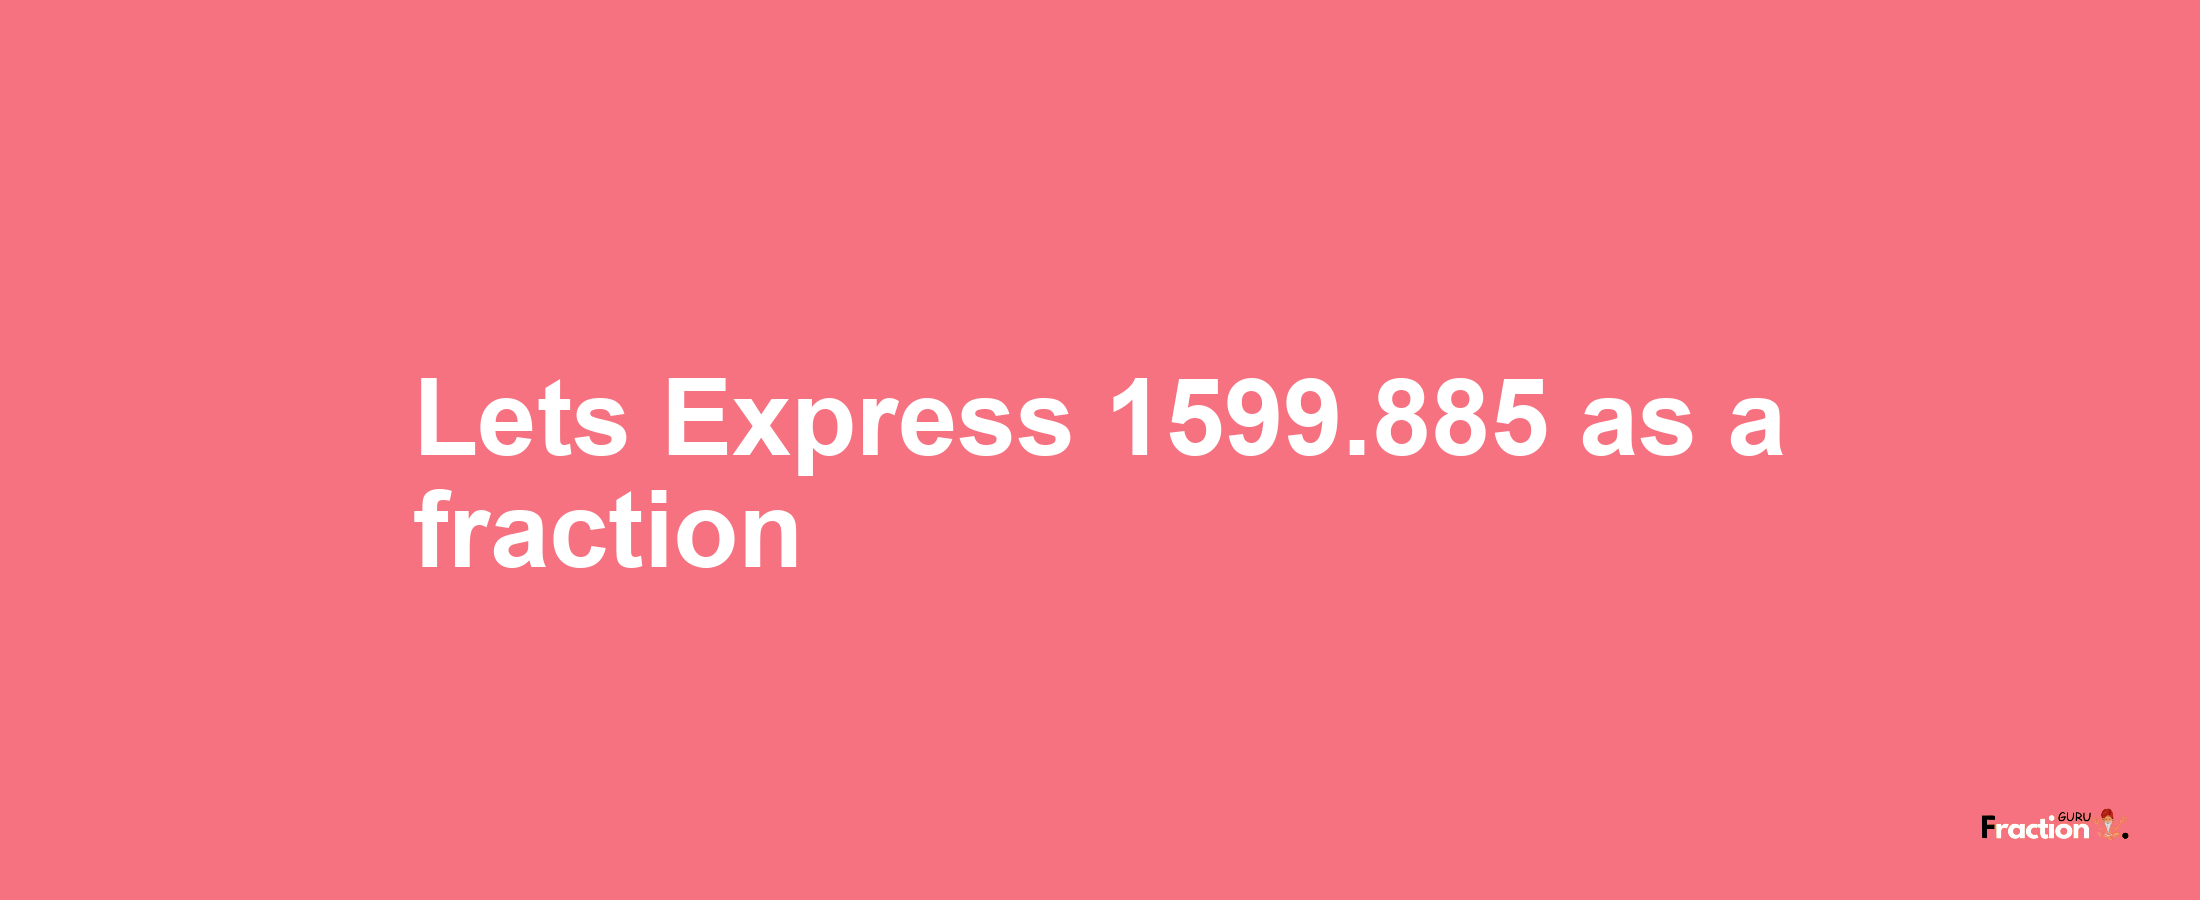 Lets Express 1599.885 as afraction